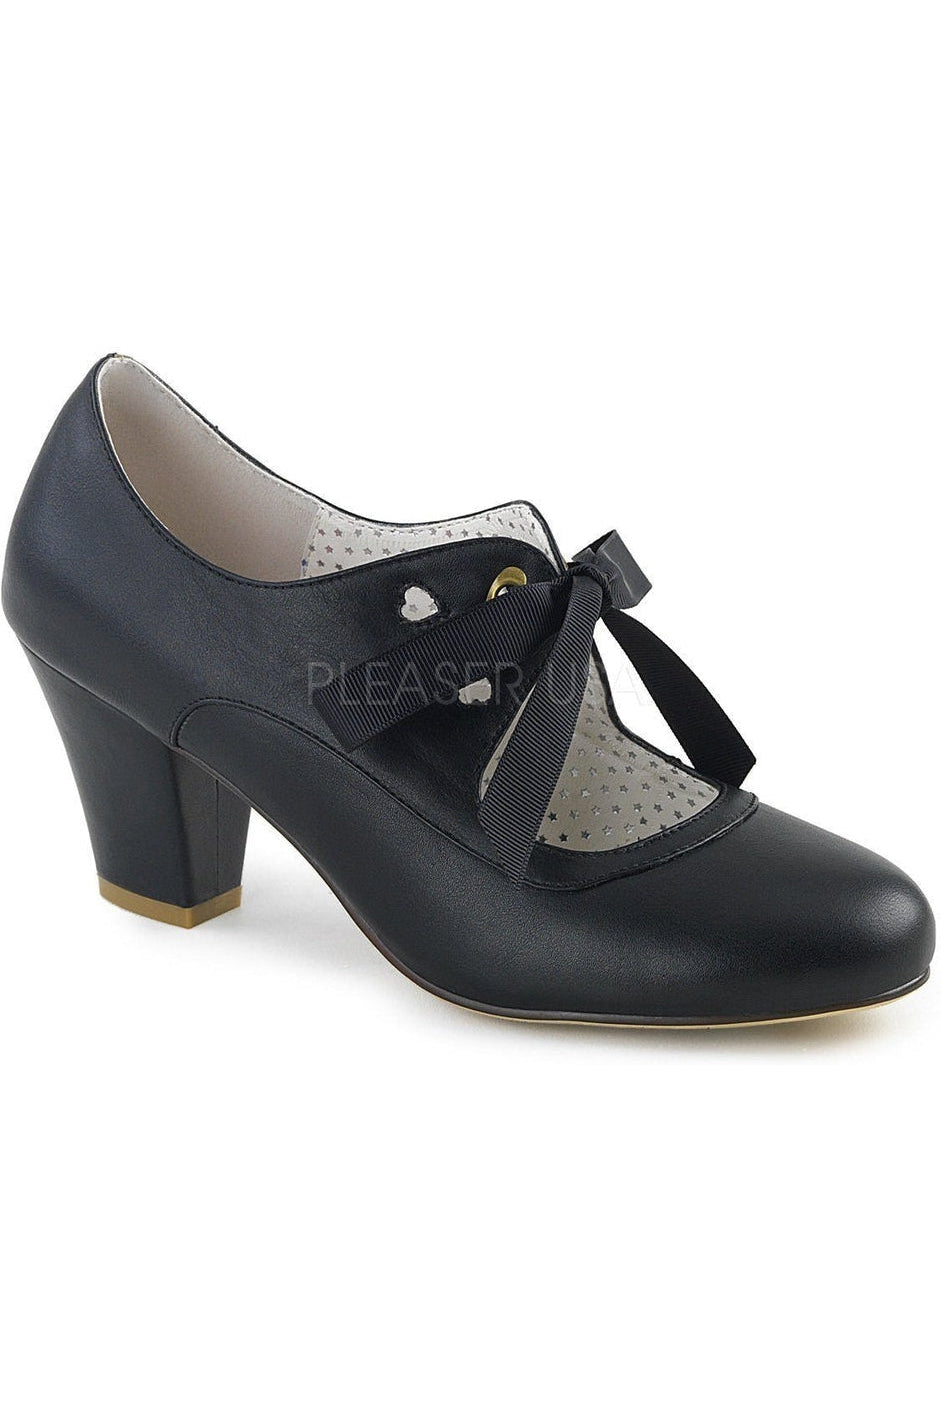 WIGGLE-32 Pump | Black Faux Leather-Pin Up Couture-Black-Mary Janes-SEXYSHOES.COM